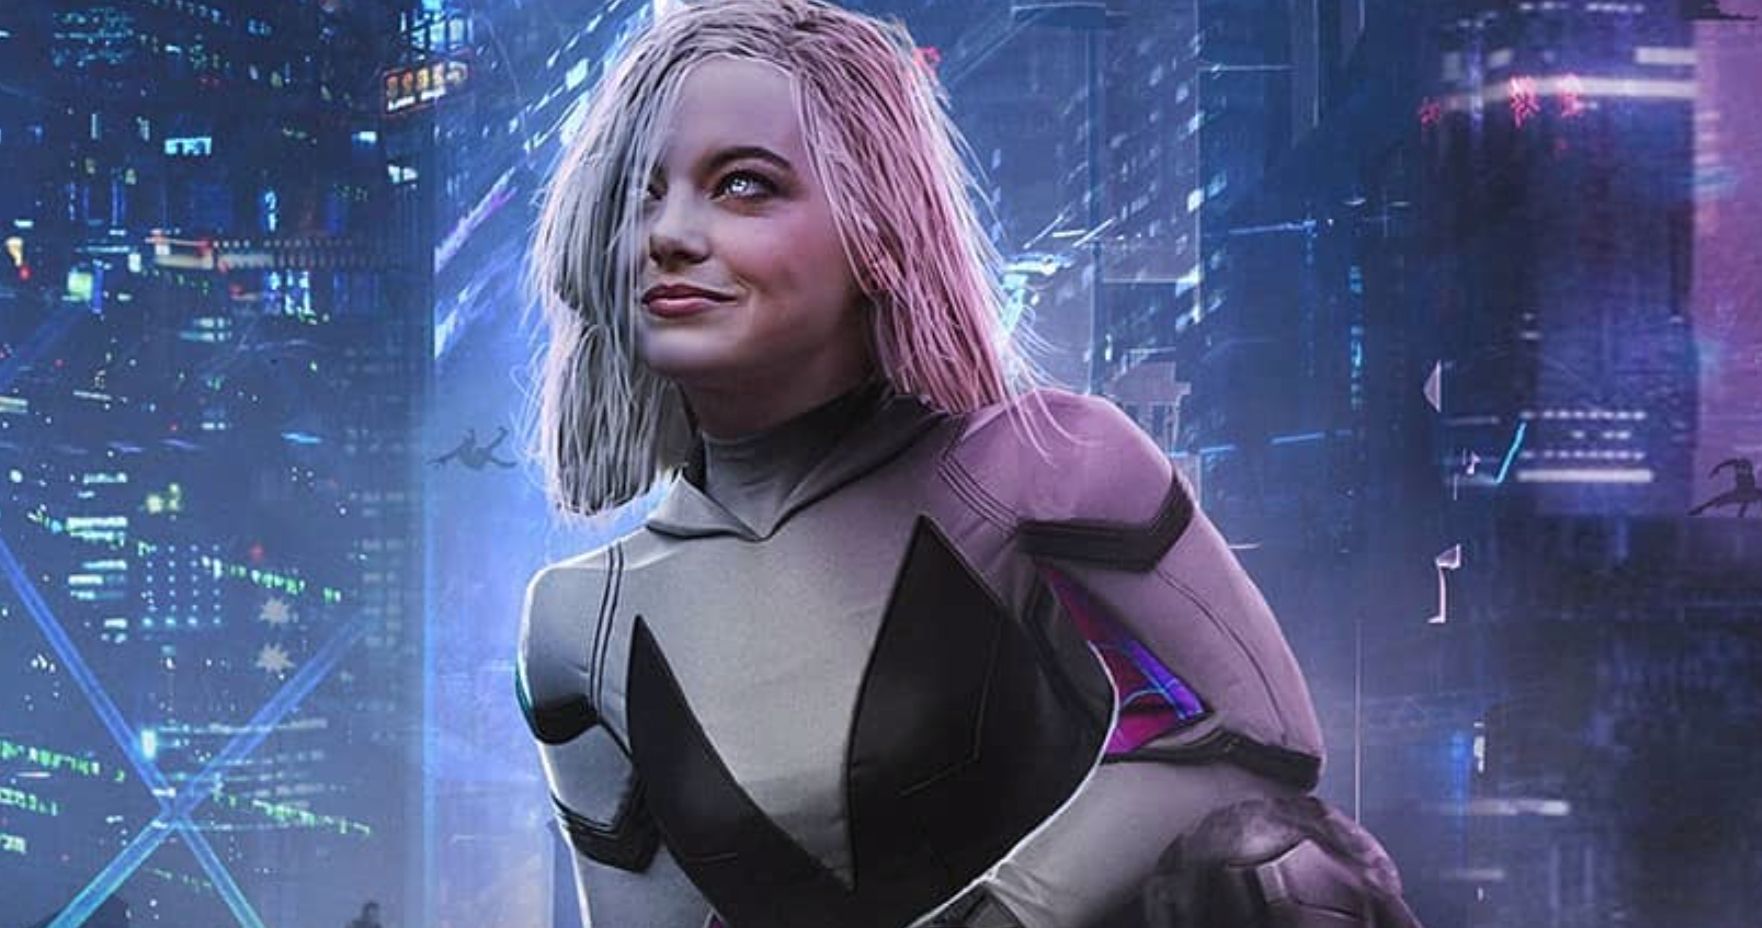 Emma Stone as Spider-Gwen? This Fan Art Will Leave You Wanting a Live-Action Movie